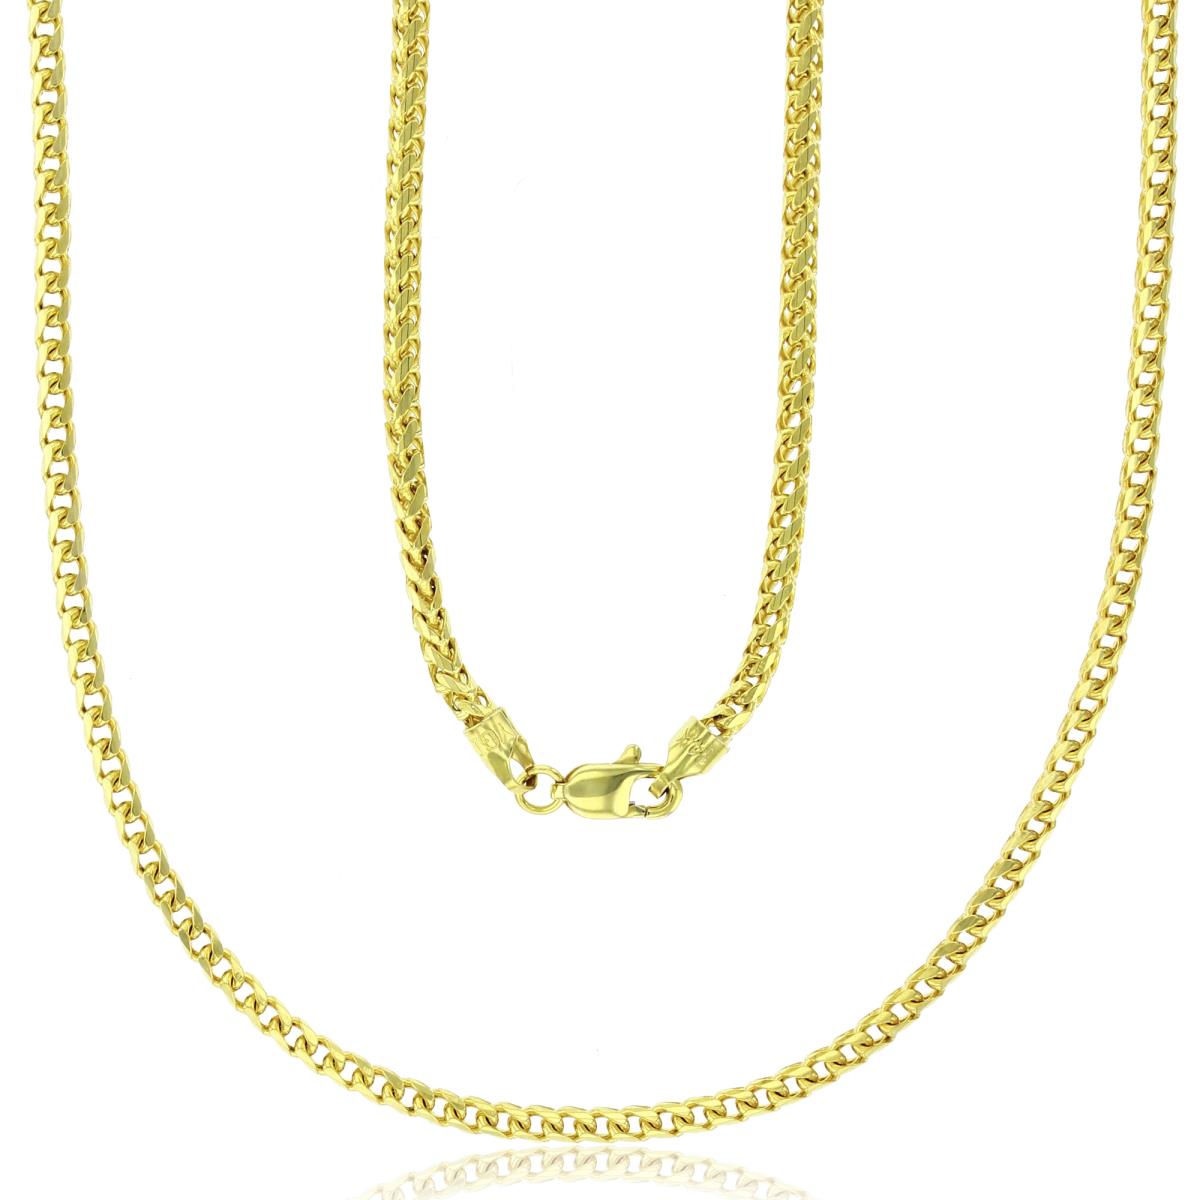 14K Yellow Gold 2.75mm 22" Solid Franco 080 Chain